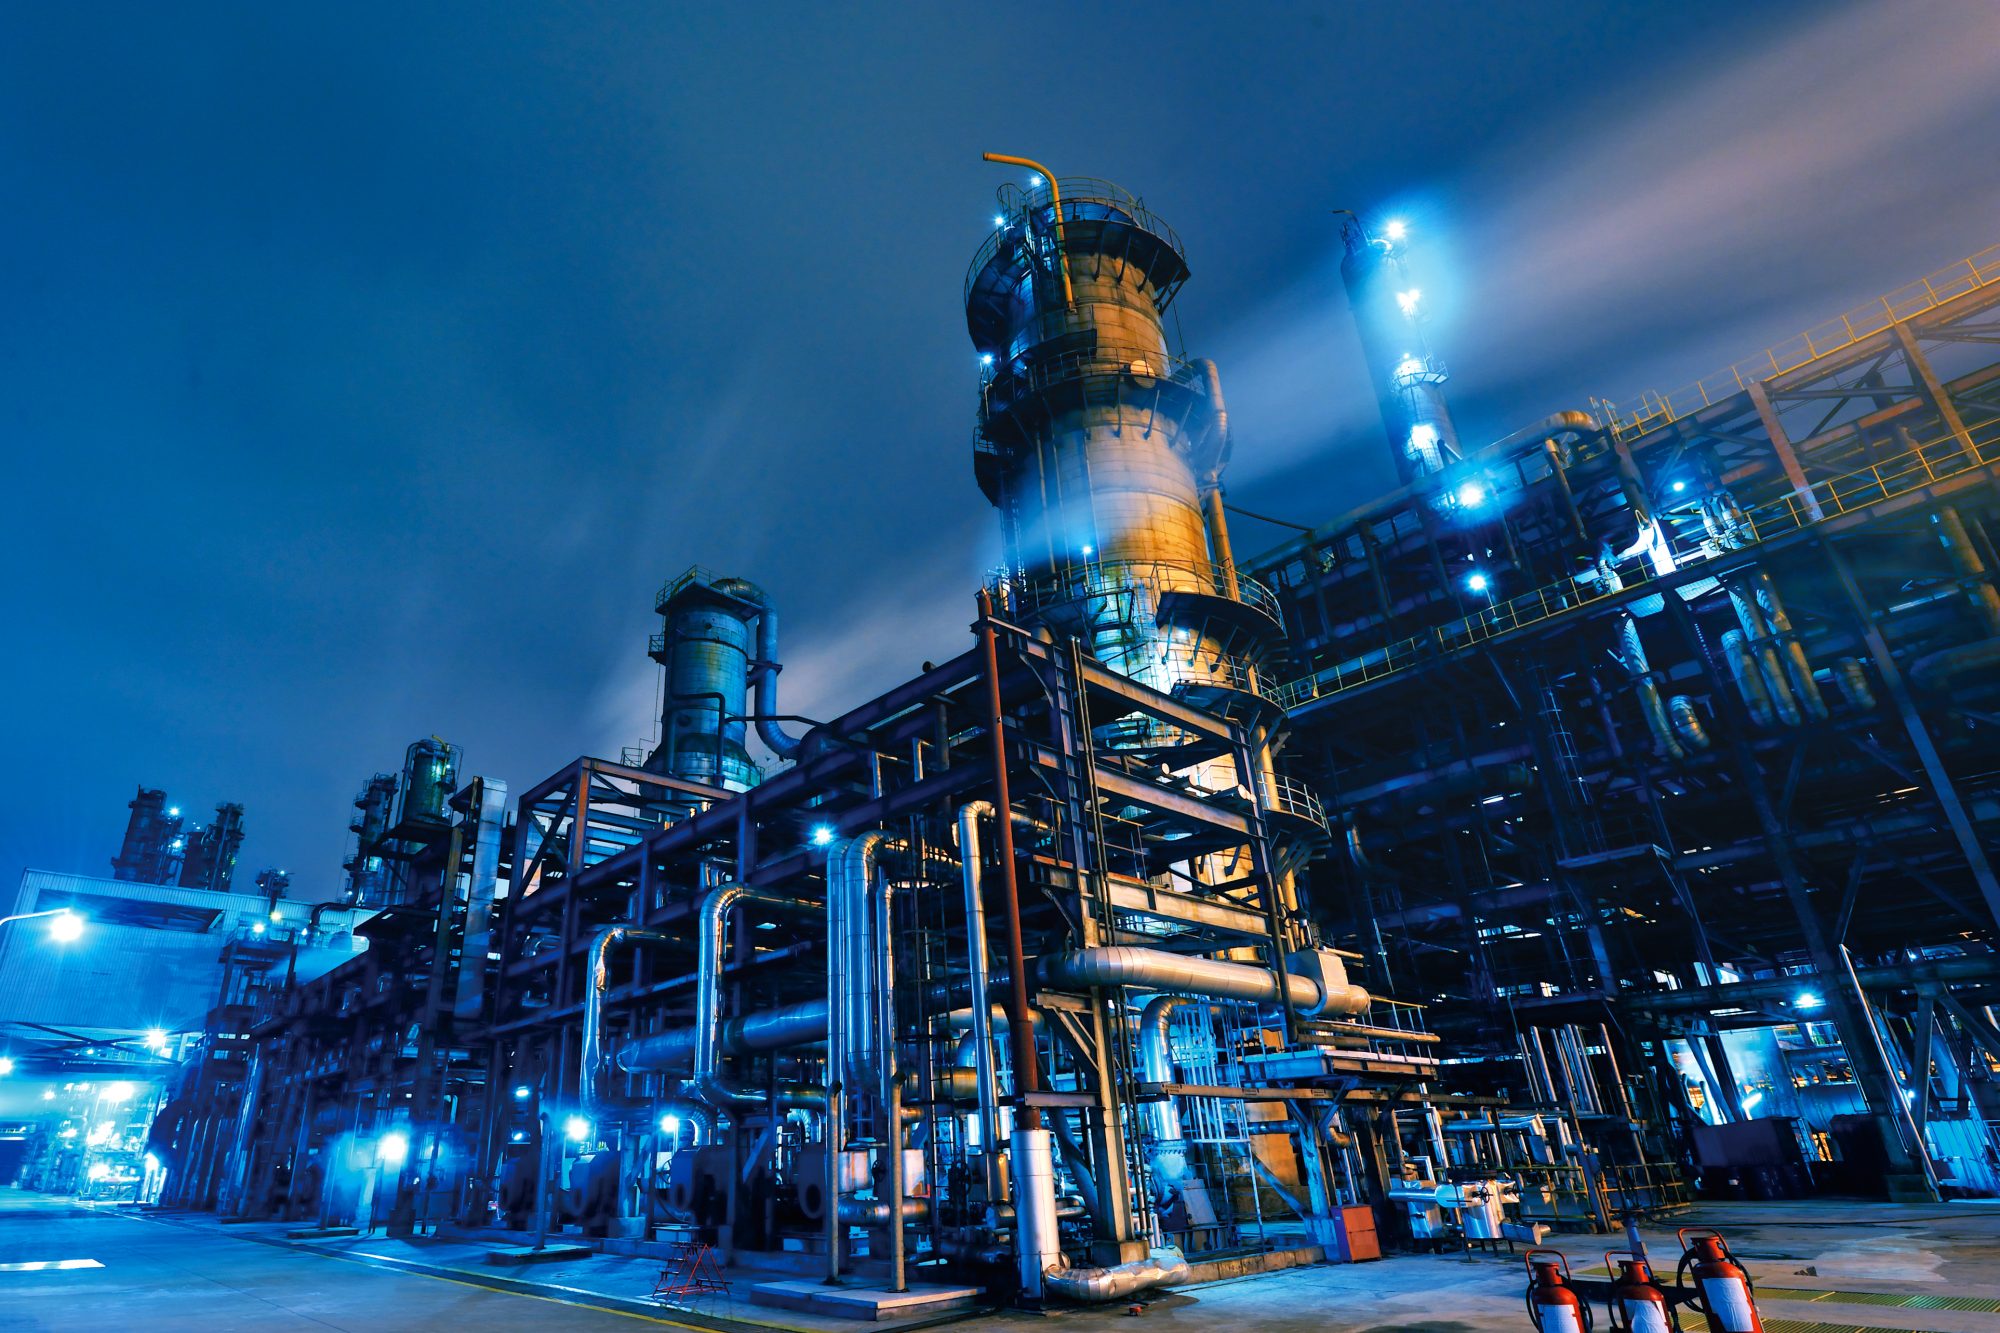 Oil Refinery, Chemical & Petrochemical Plant